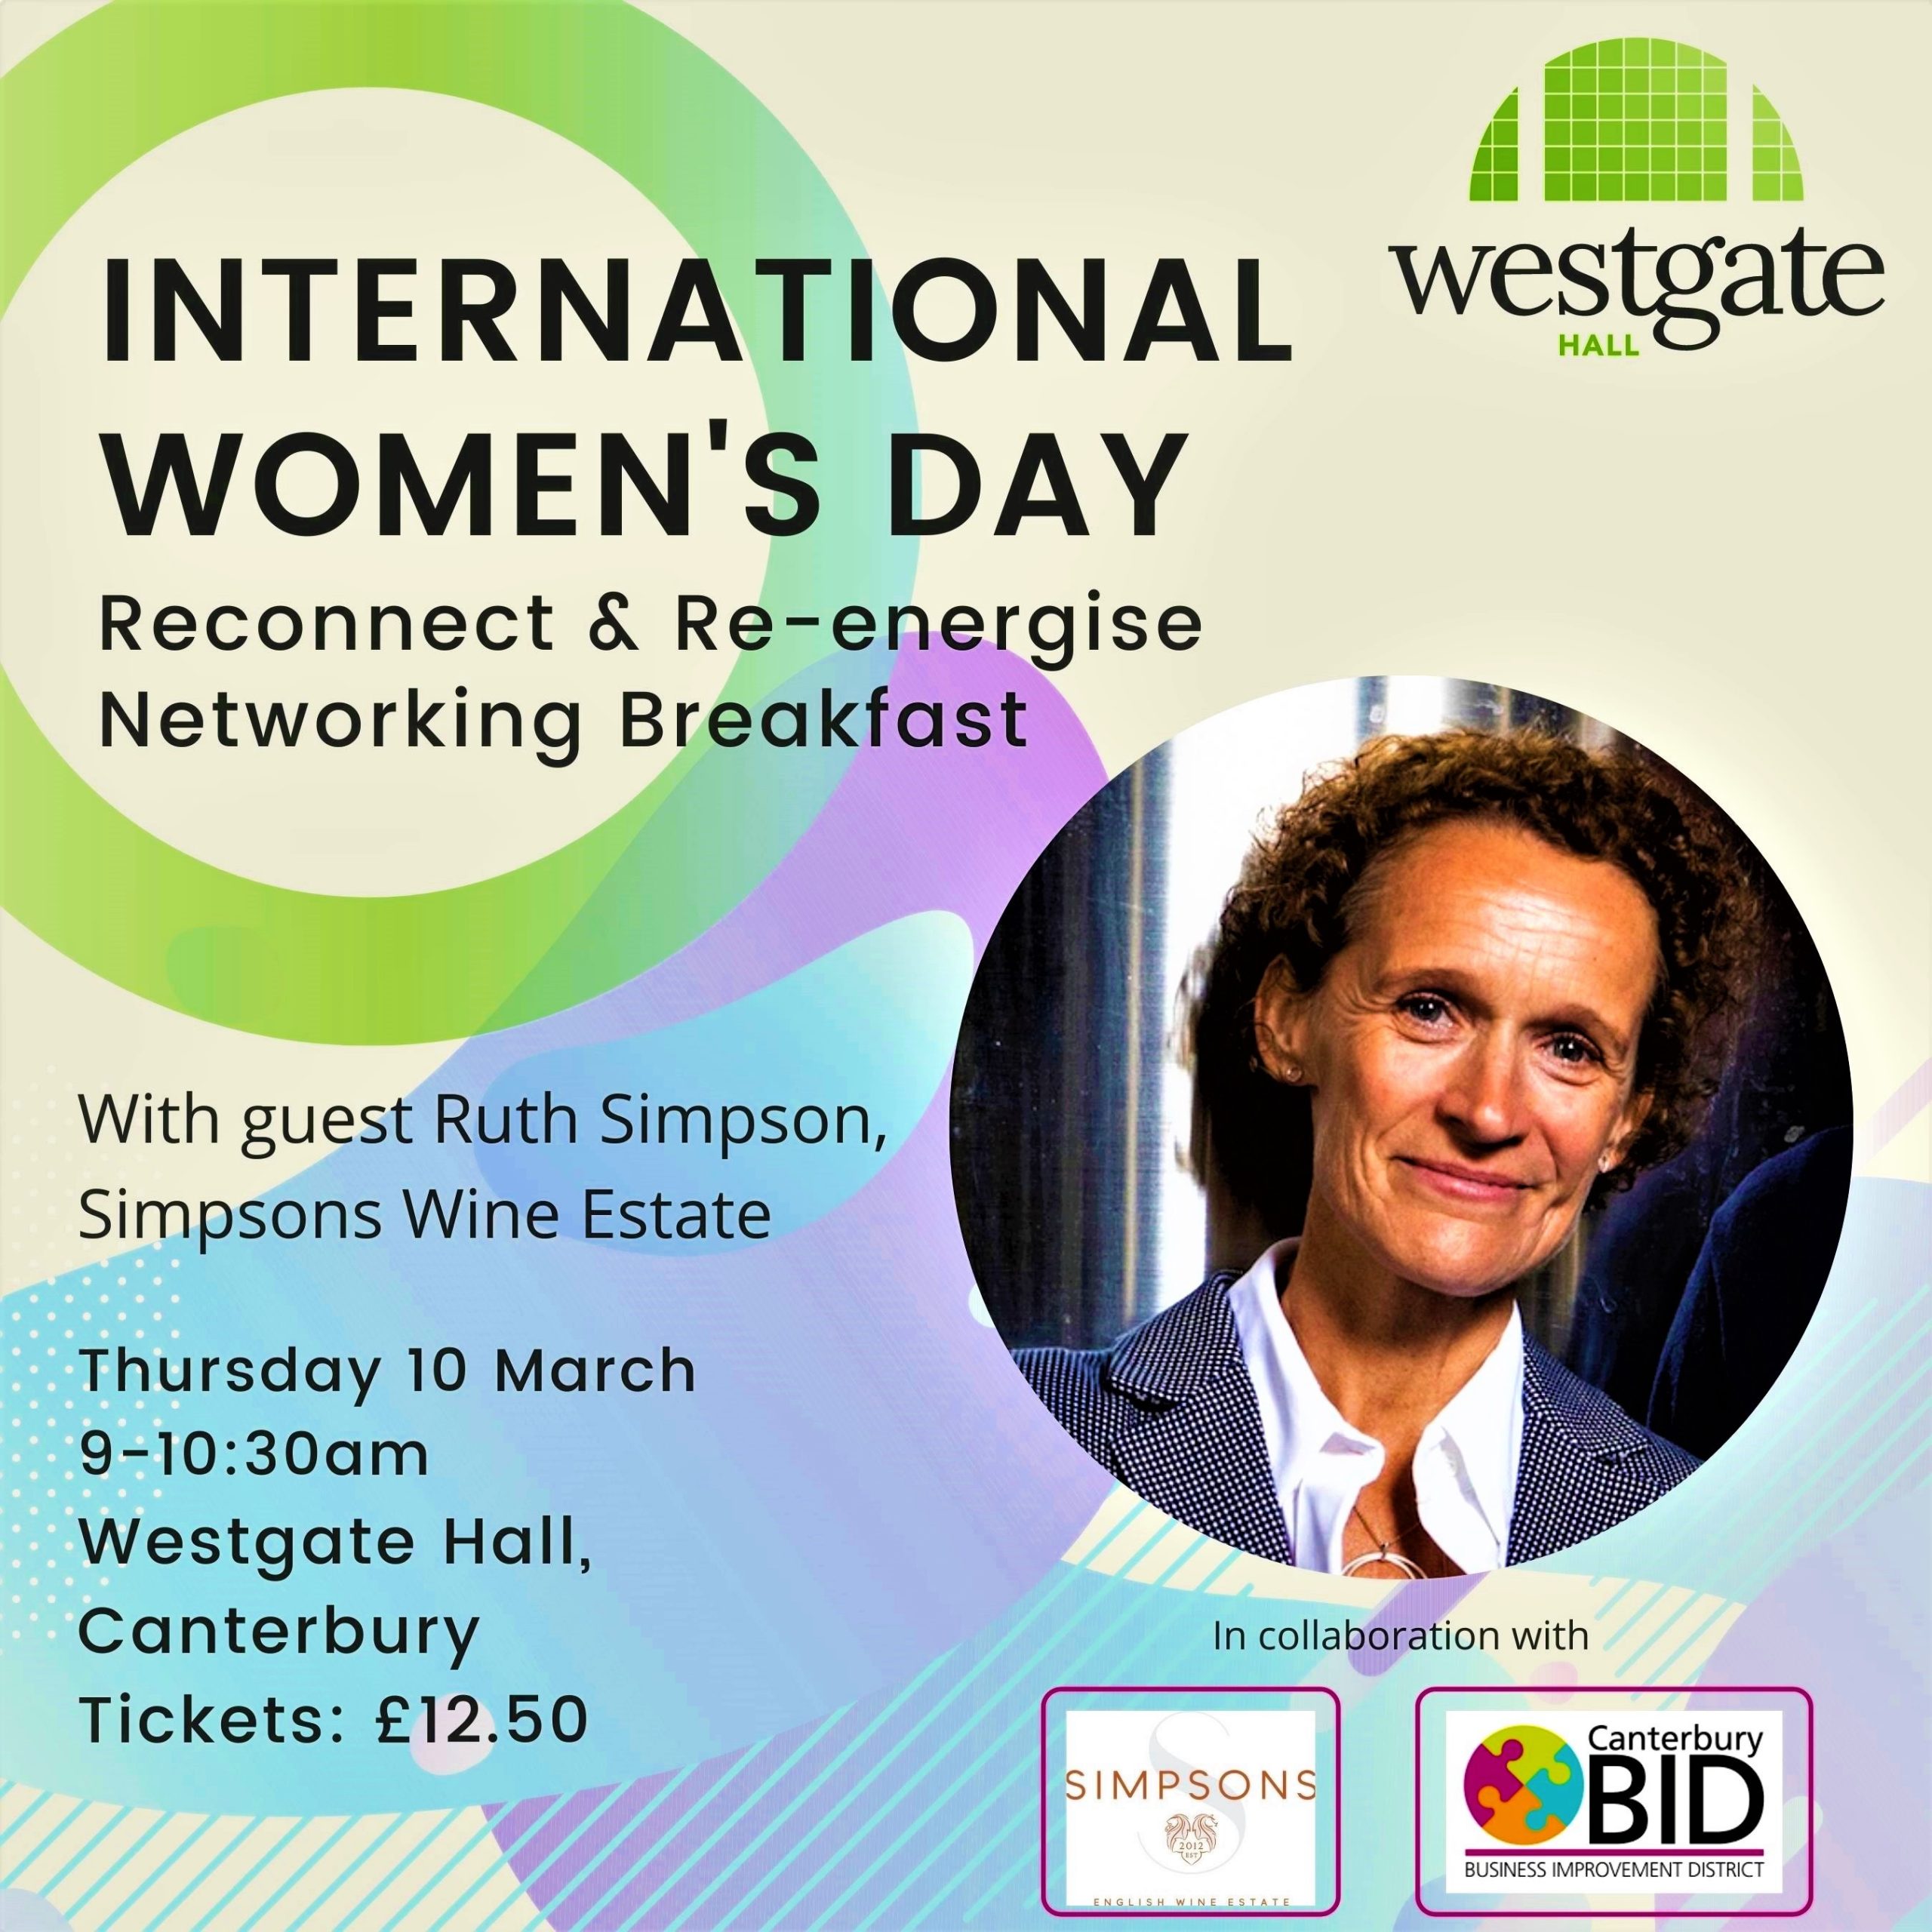 A poster for International Women's Day - reconnect & re-energise networking breakfast - with guest Ruth Simpson, Simpsons Wine Estate - Thursday 10 march, Westgate Hall, Canterbury